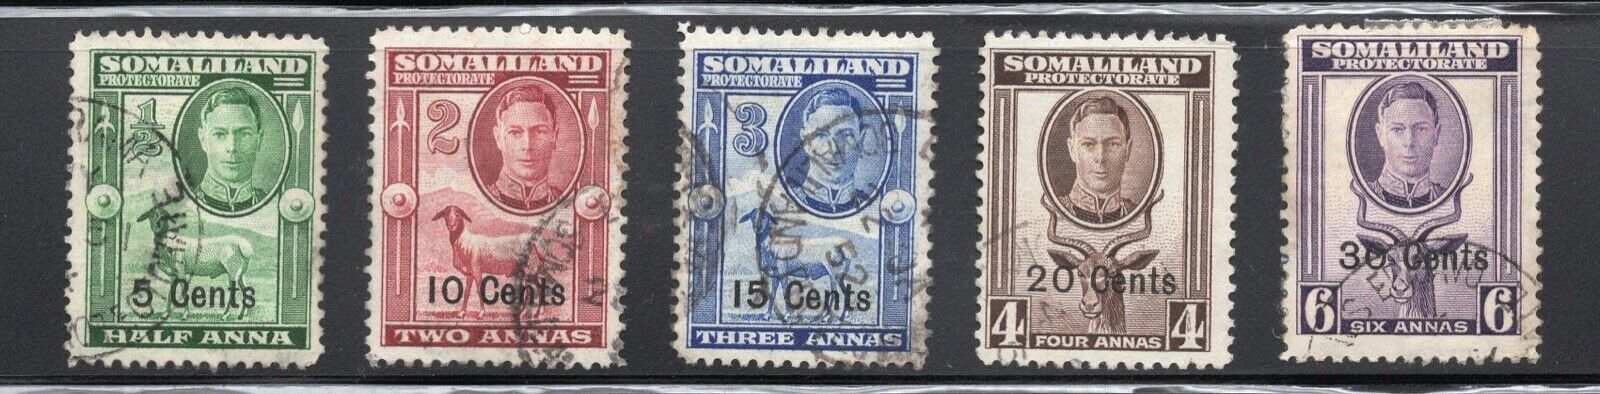 Somaliland Protectorate Sg125-129 (part Set) Used Cat. £11.50